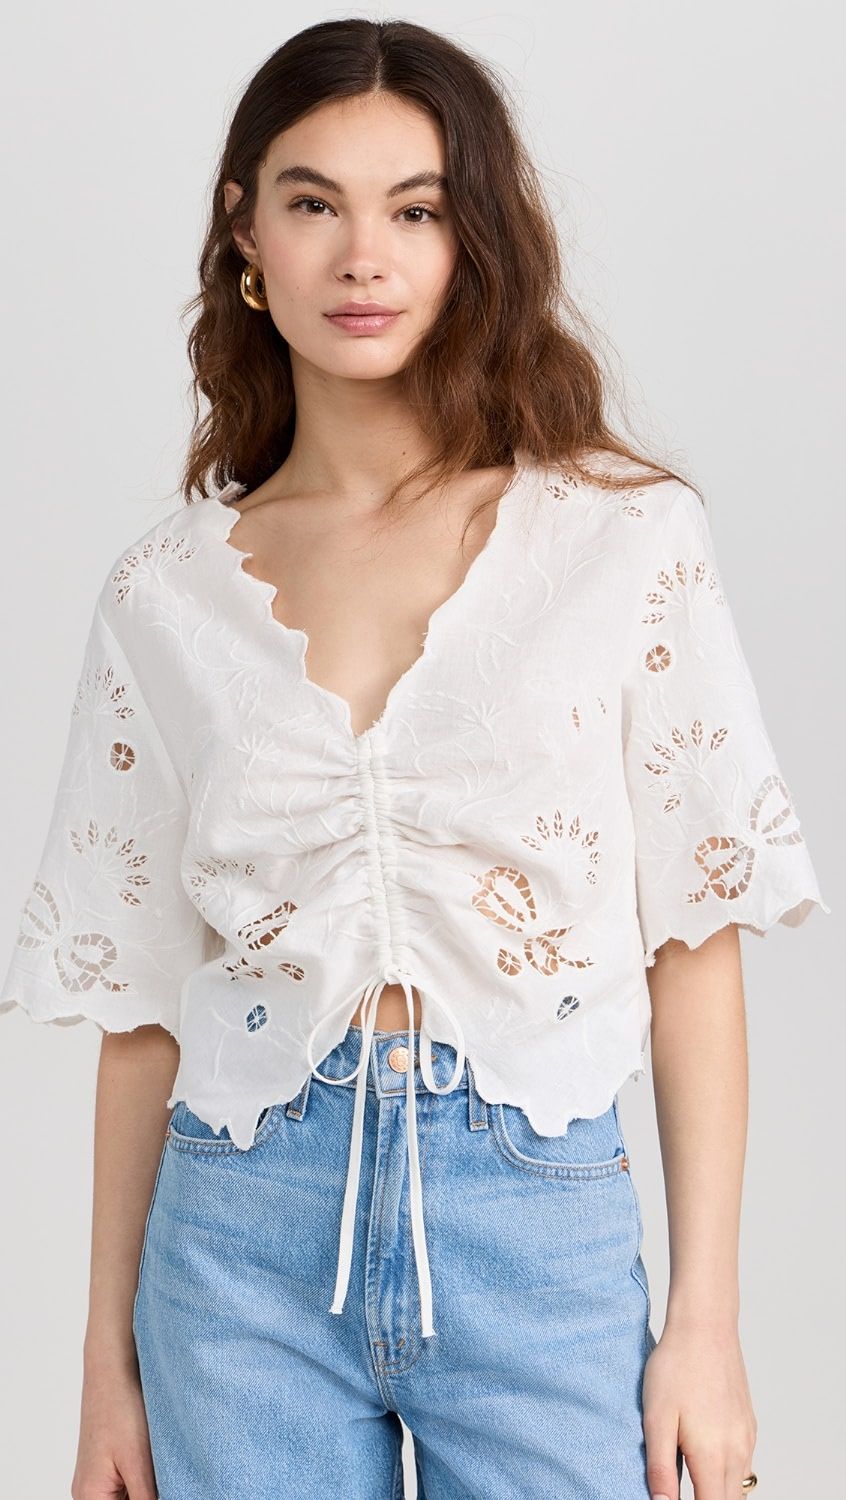 The Social Butterfly Top | Shopbop